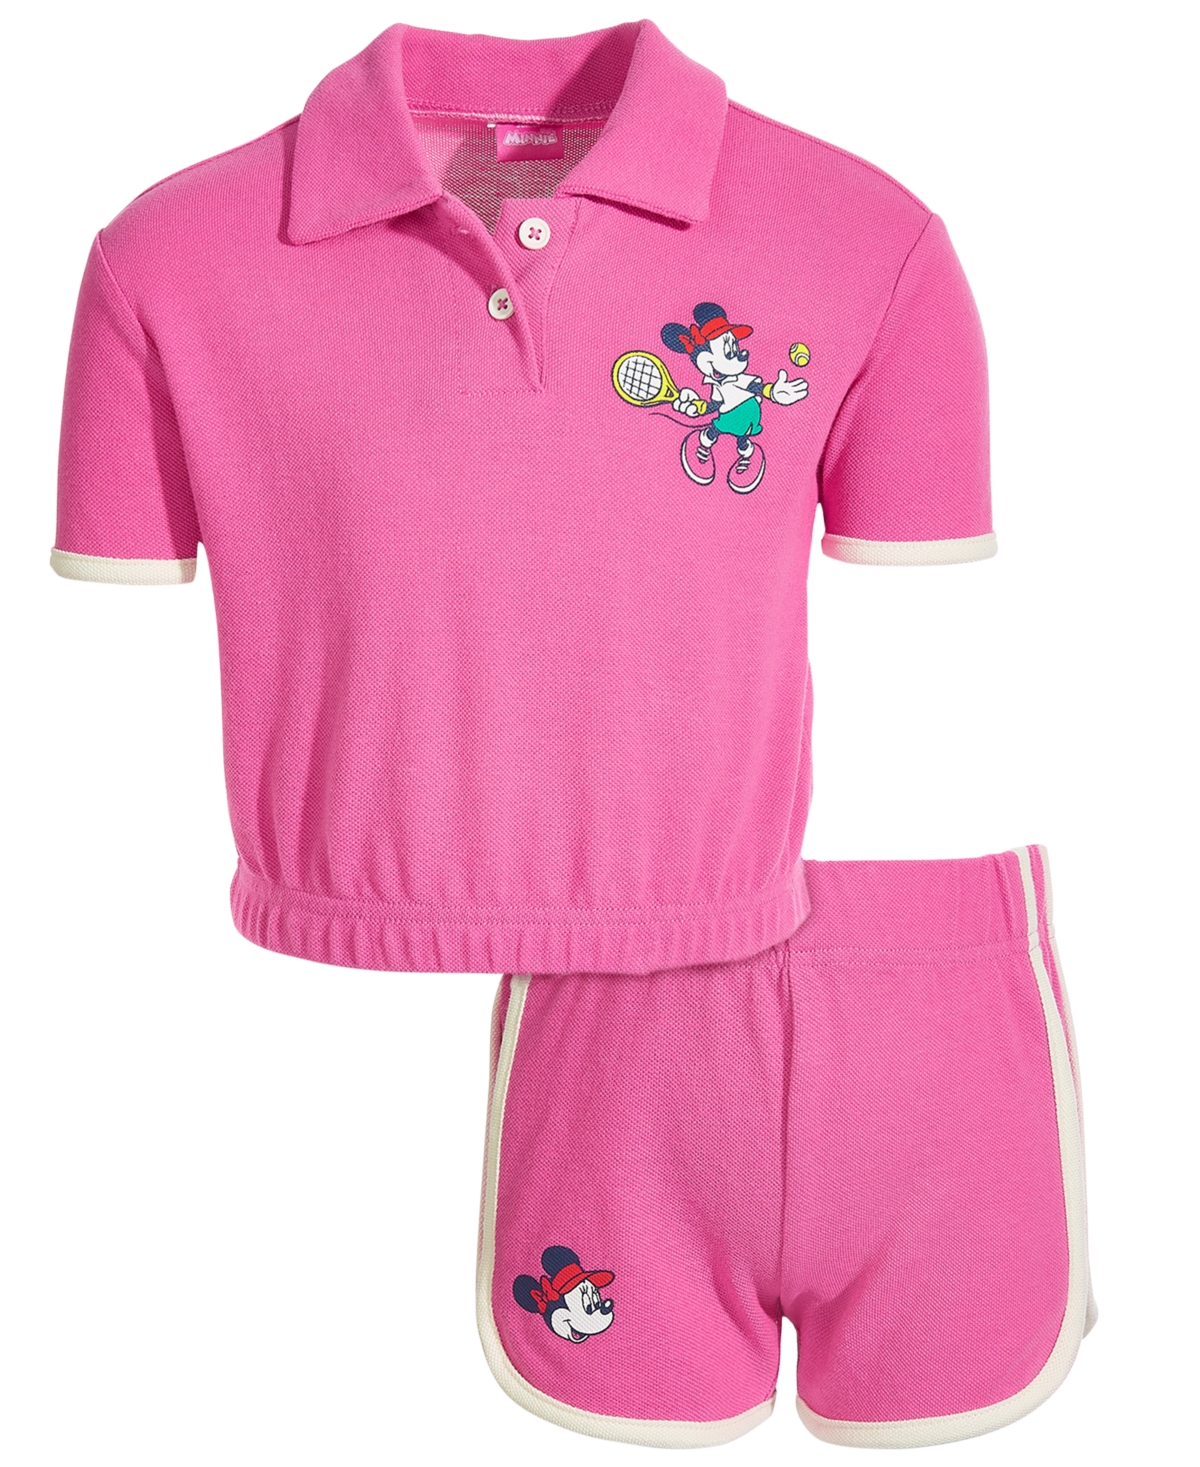 Disney Kids' Toddler & Little Girls Minnie Mouse Polo Shirt & Shorts, 2 Piece Set In Pink